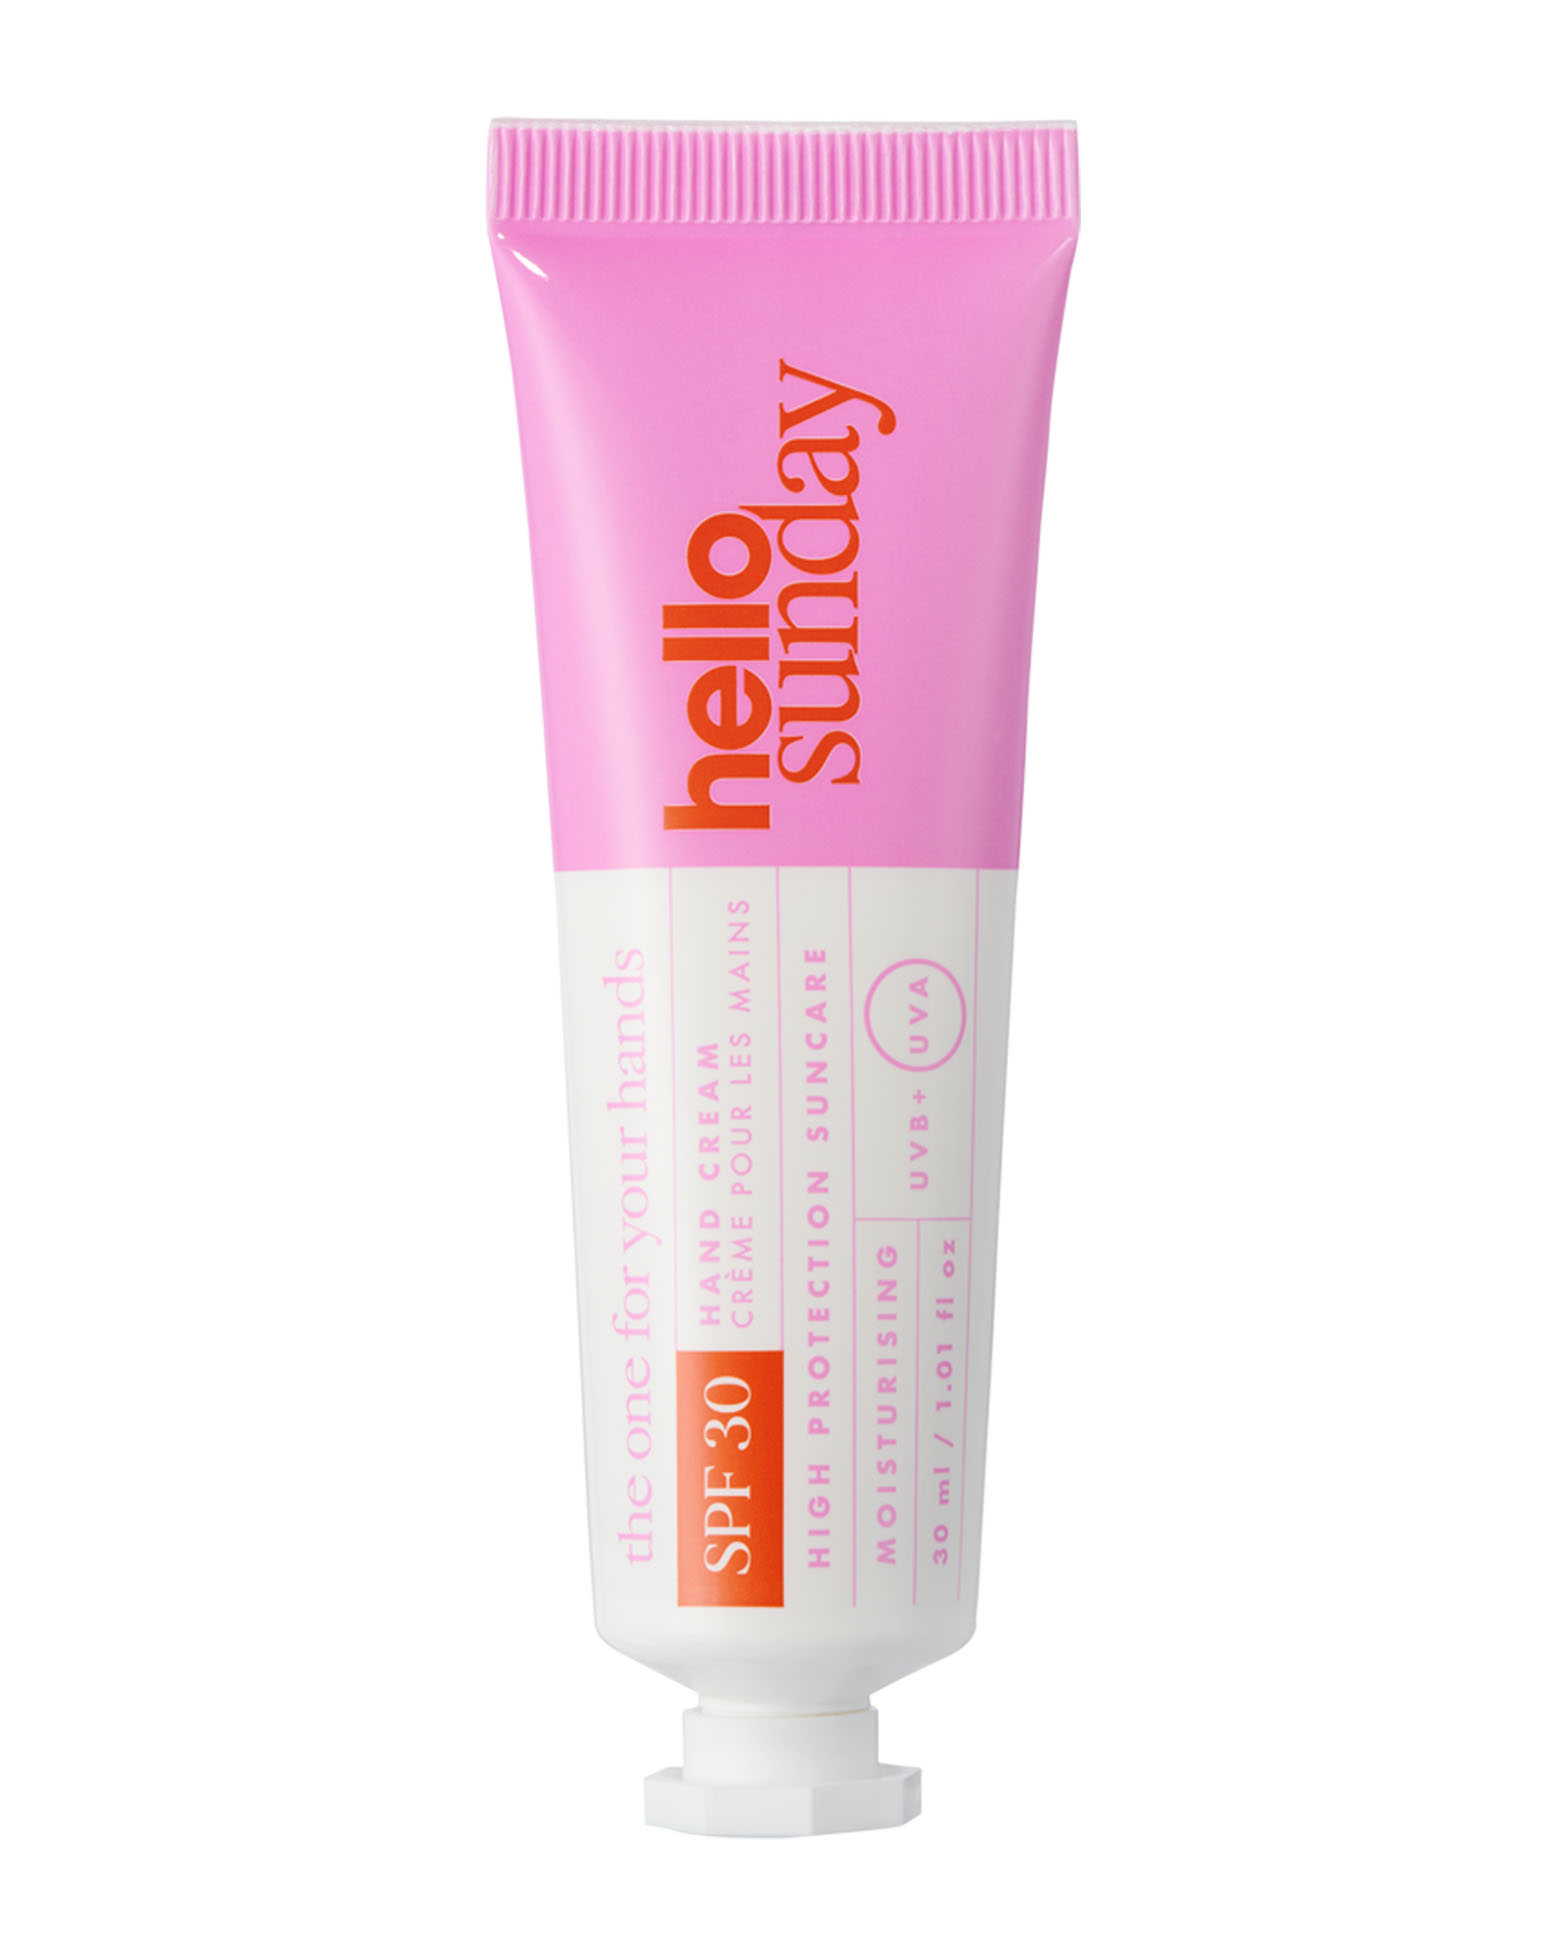 Hello Sunday - The One For Your Hands - Hand Cream SPF 30